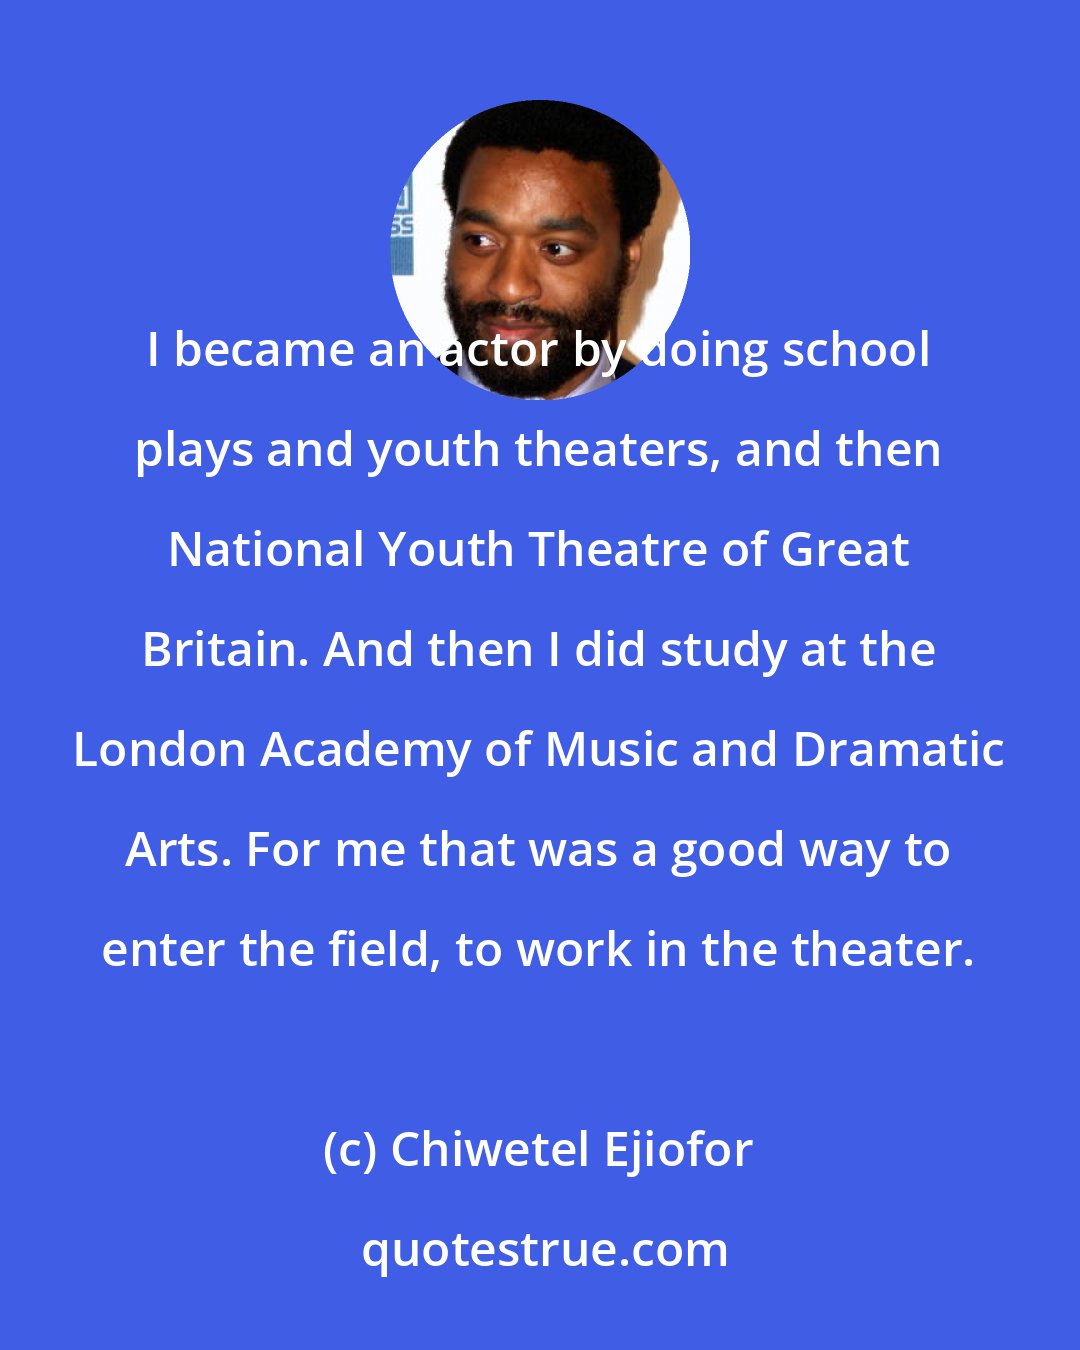 Chiwetel Ejiofor: I became an actor by doing school plays and youth theaters, and then National Youth Theatre of Great Britain. And then I did study at the London Academy of Music and Dramatic Arts. For me that was a good way to enter the field, to work in the theater.